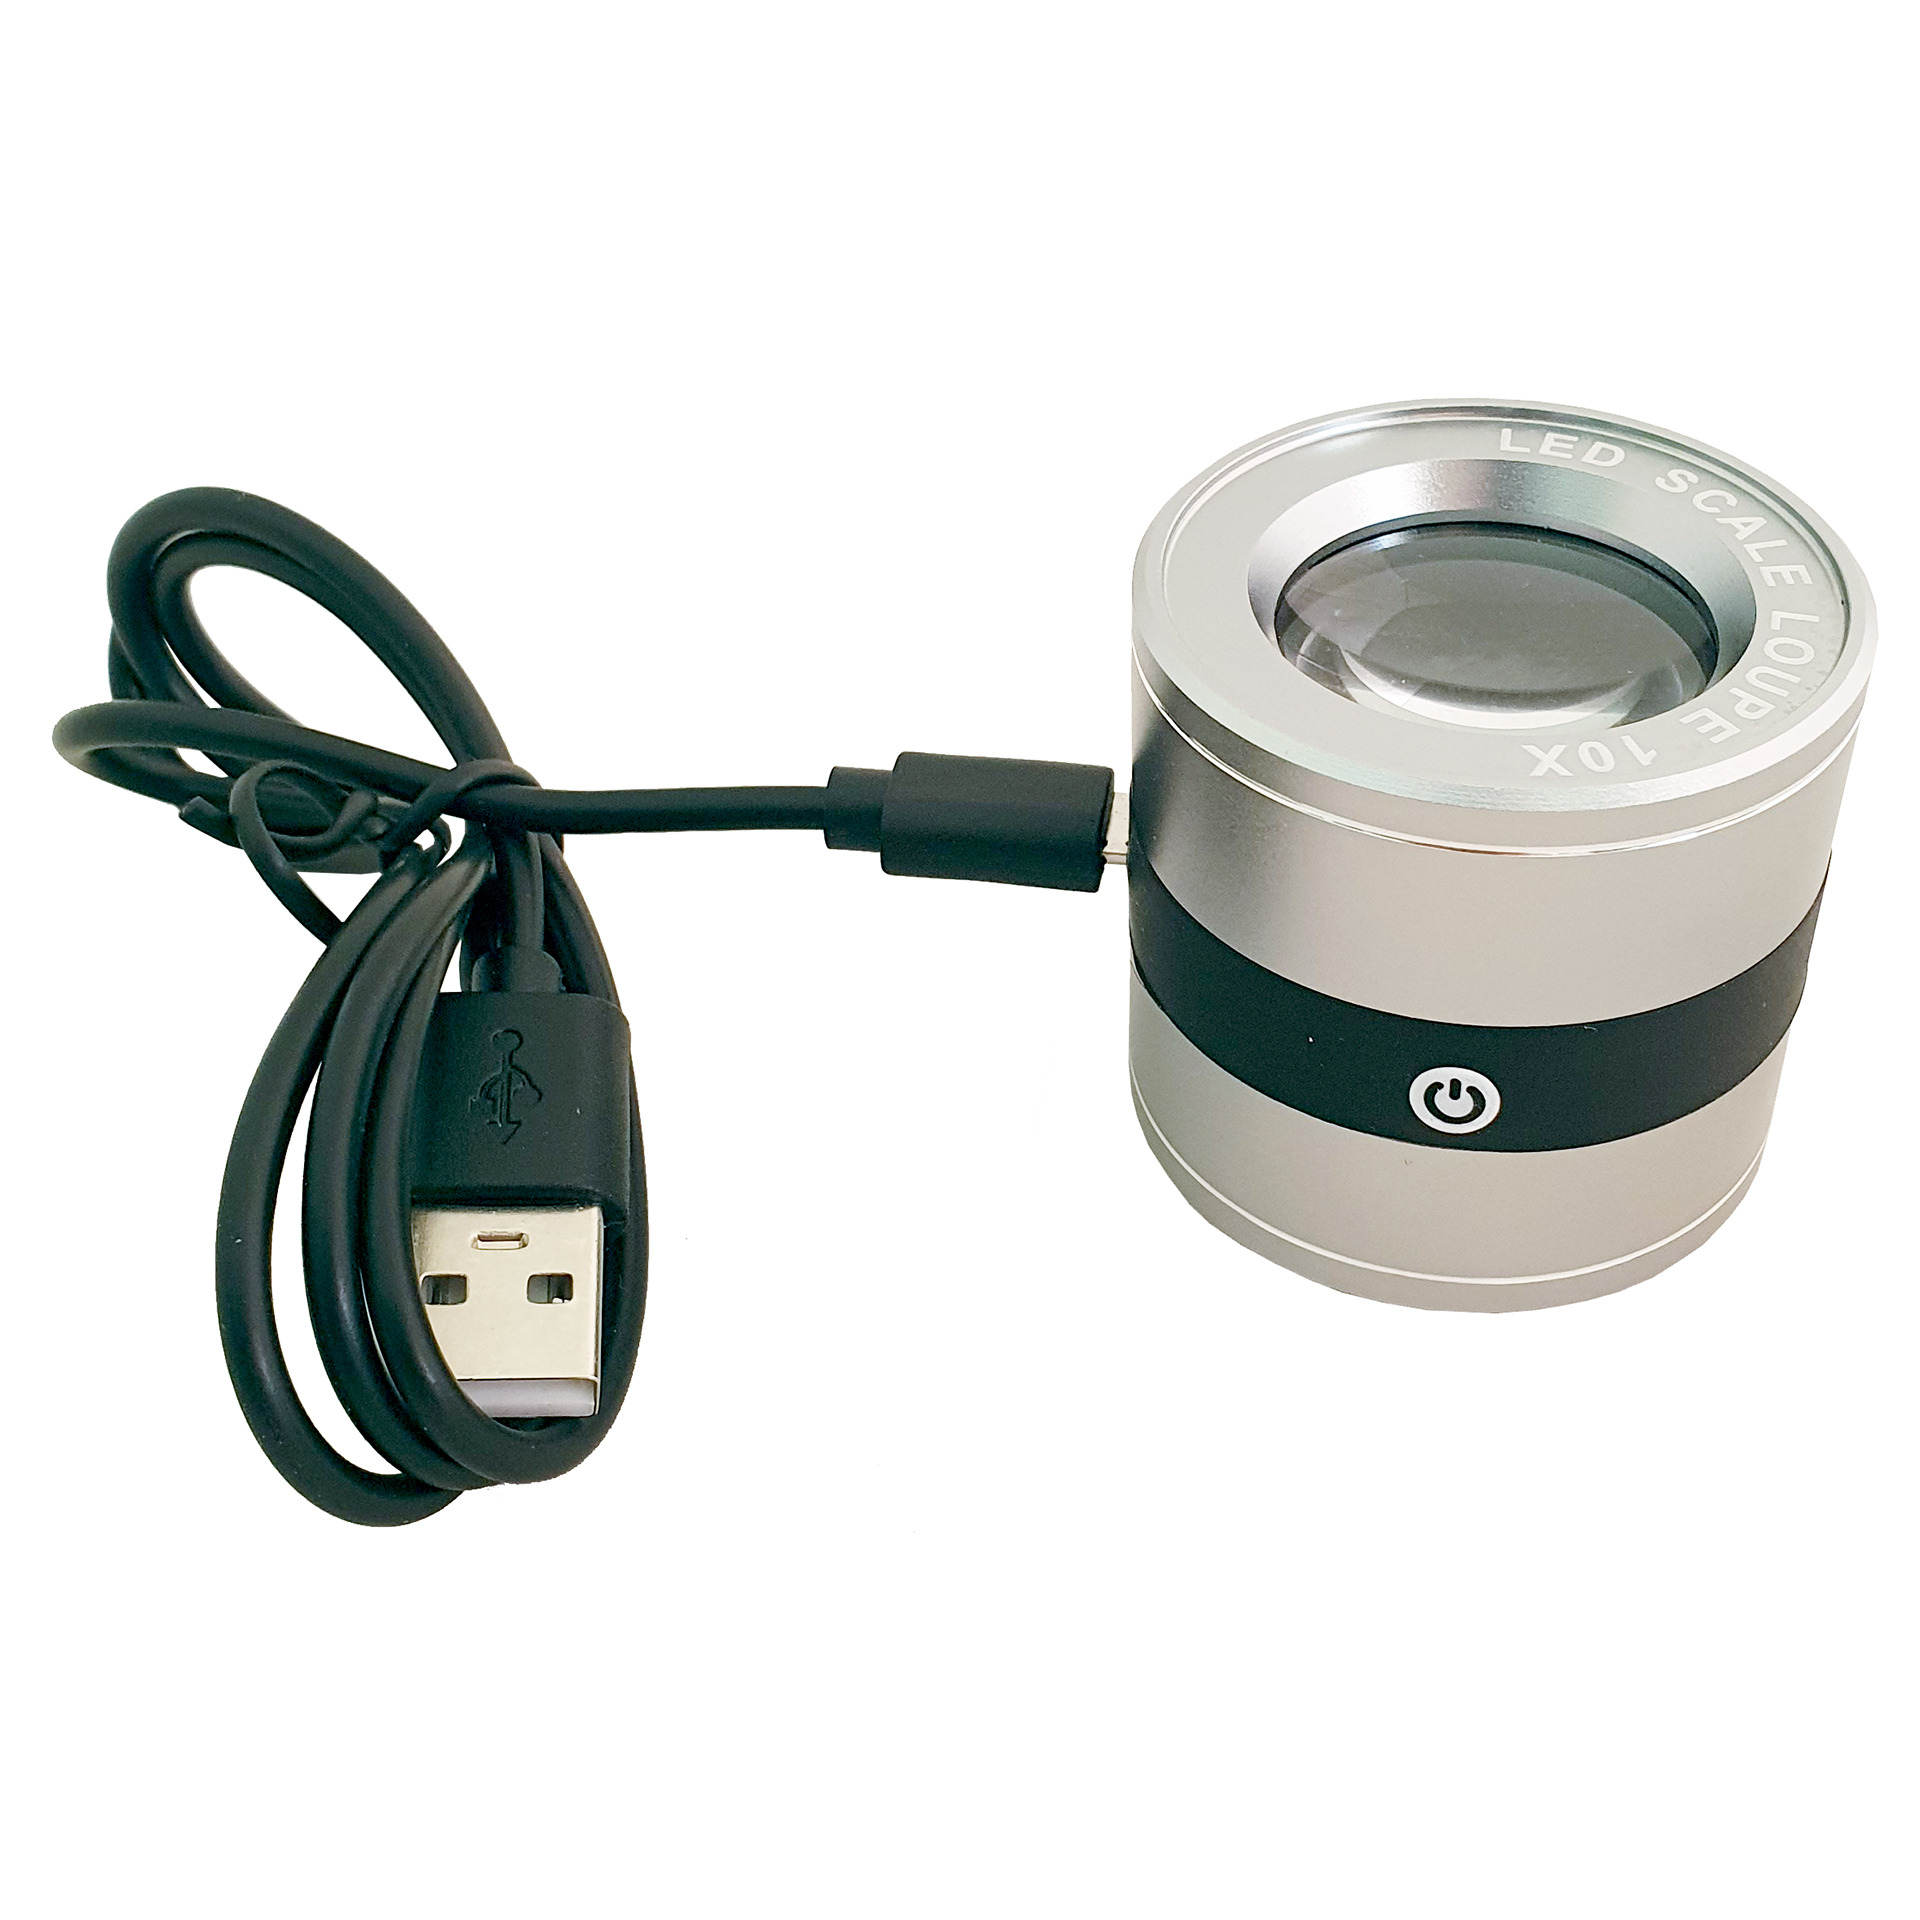 LED precision magnifier with USB charger